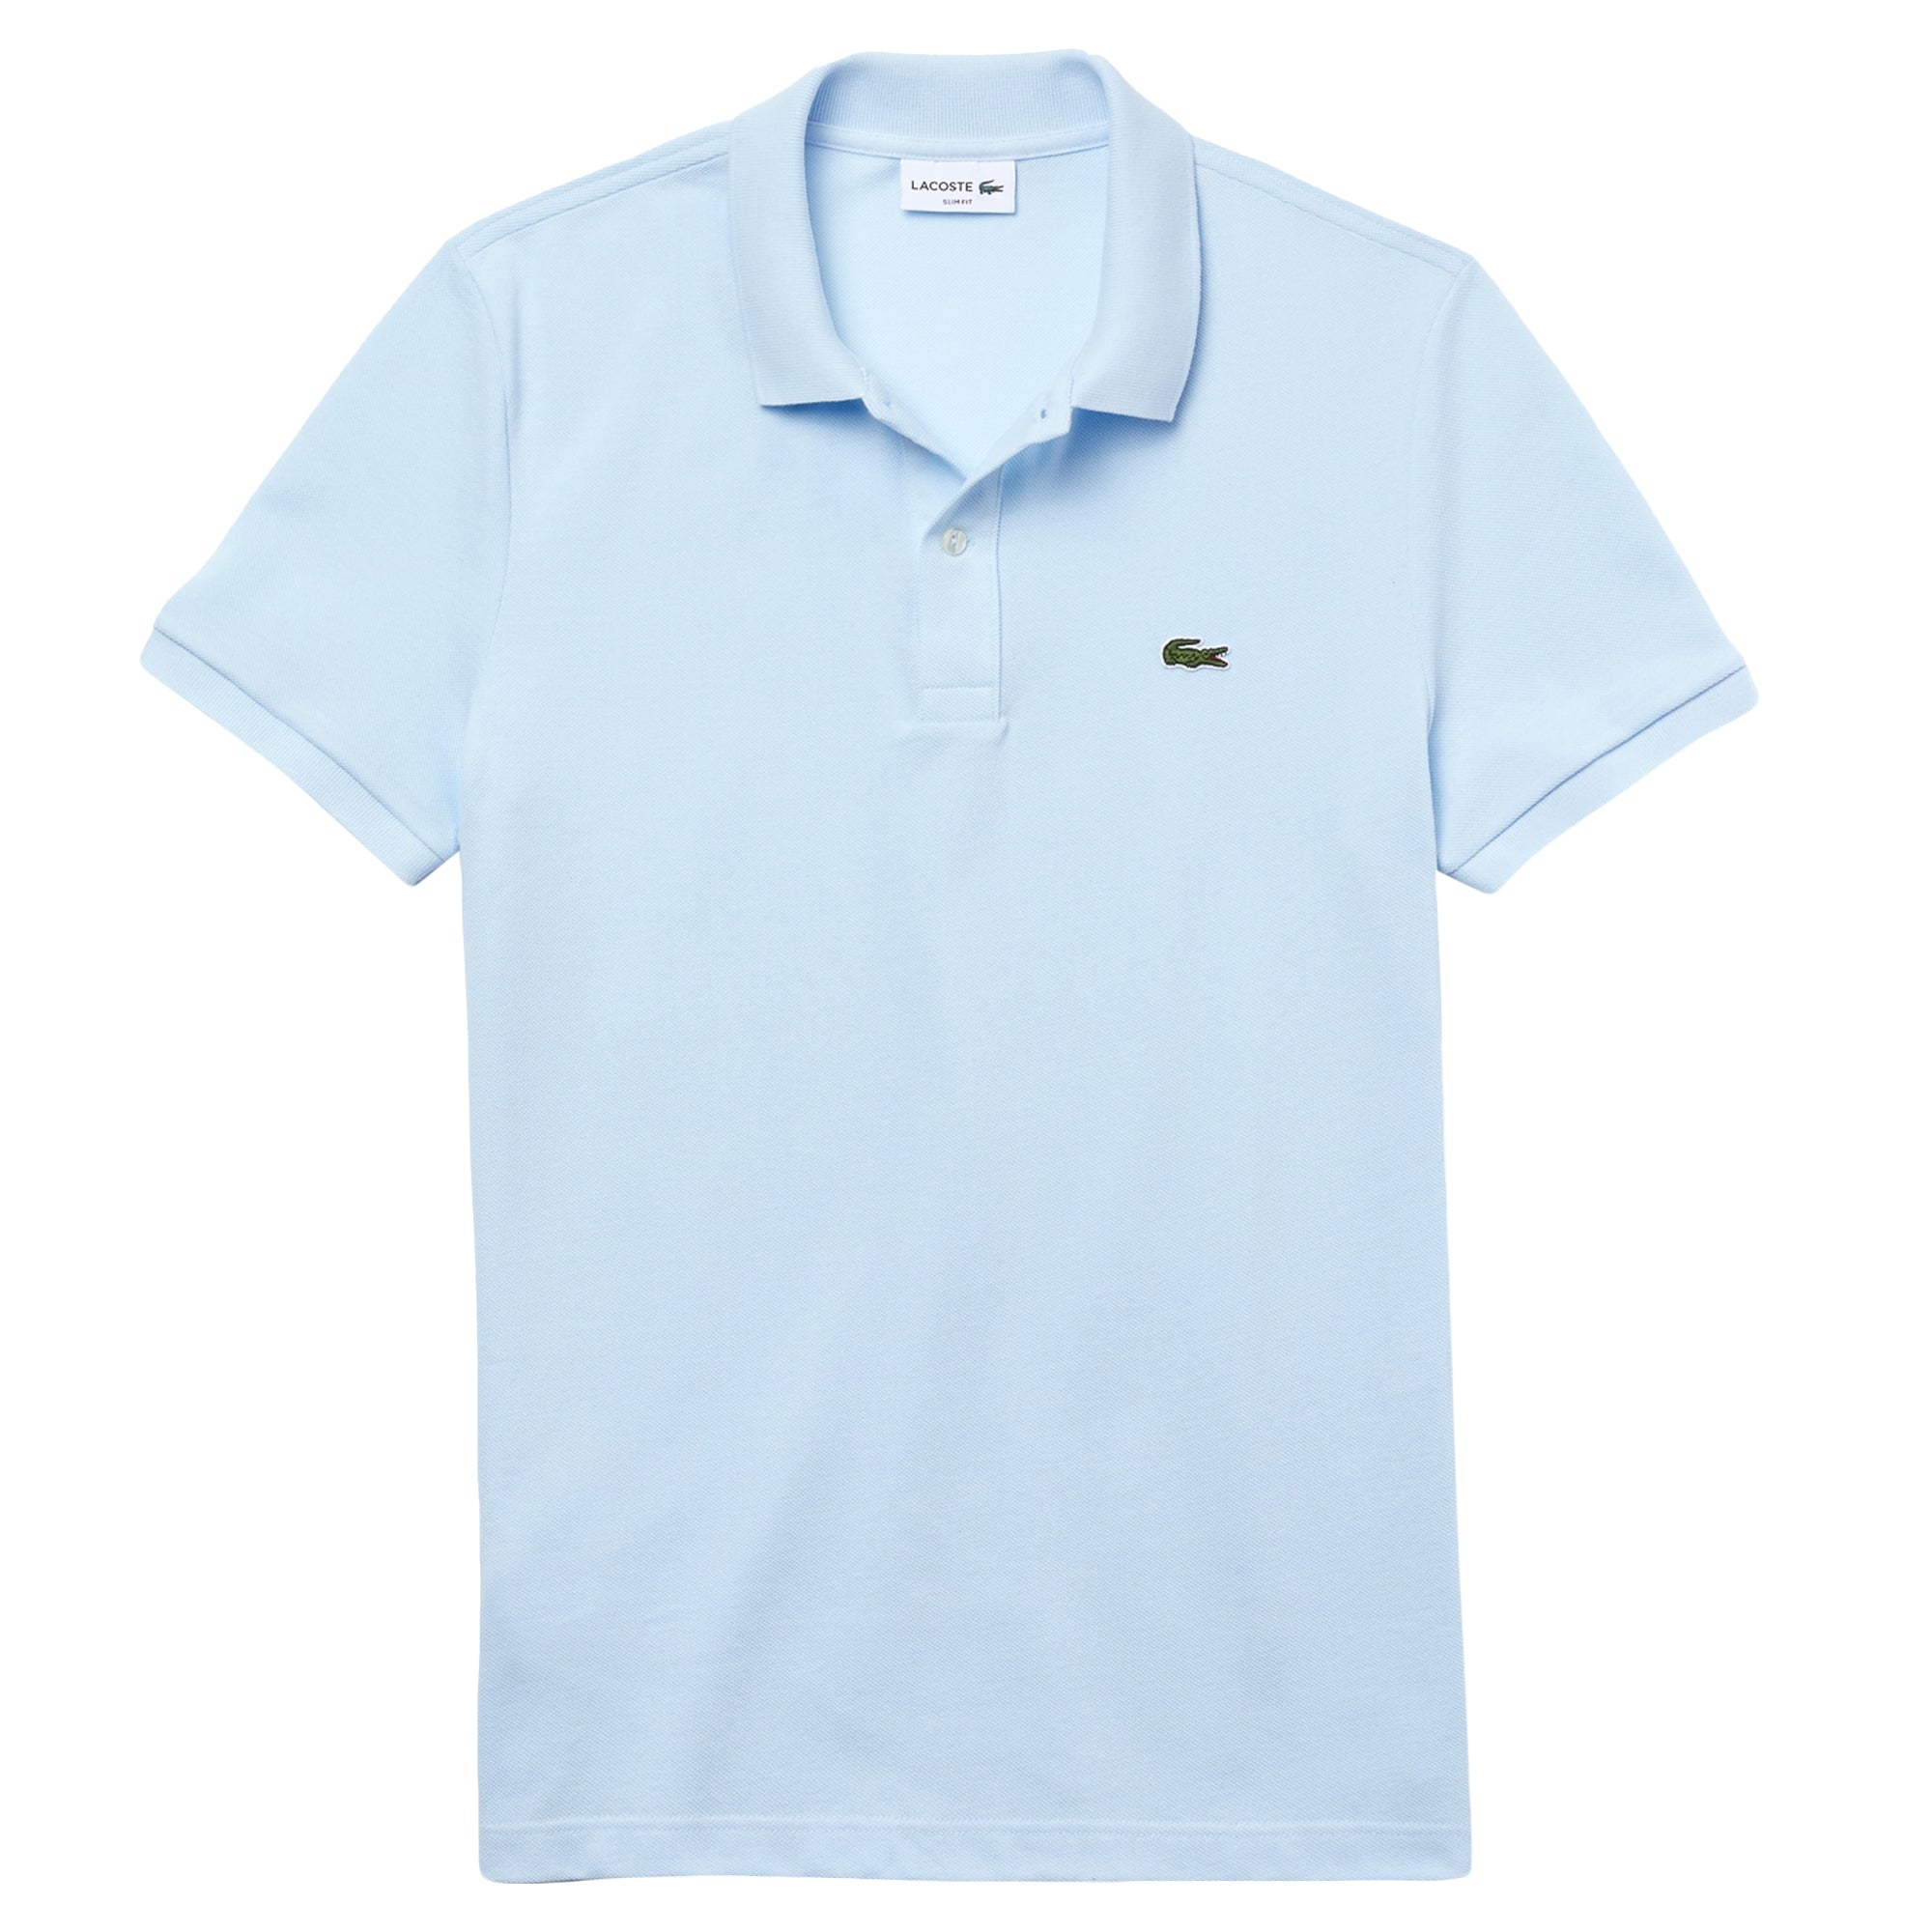 Lacoste Short Sleeved Slim Fit Polo PH4012 - Rill